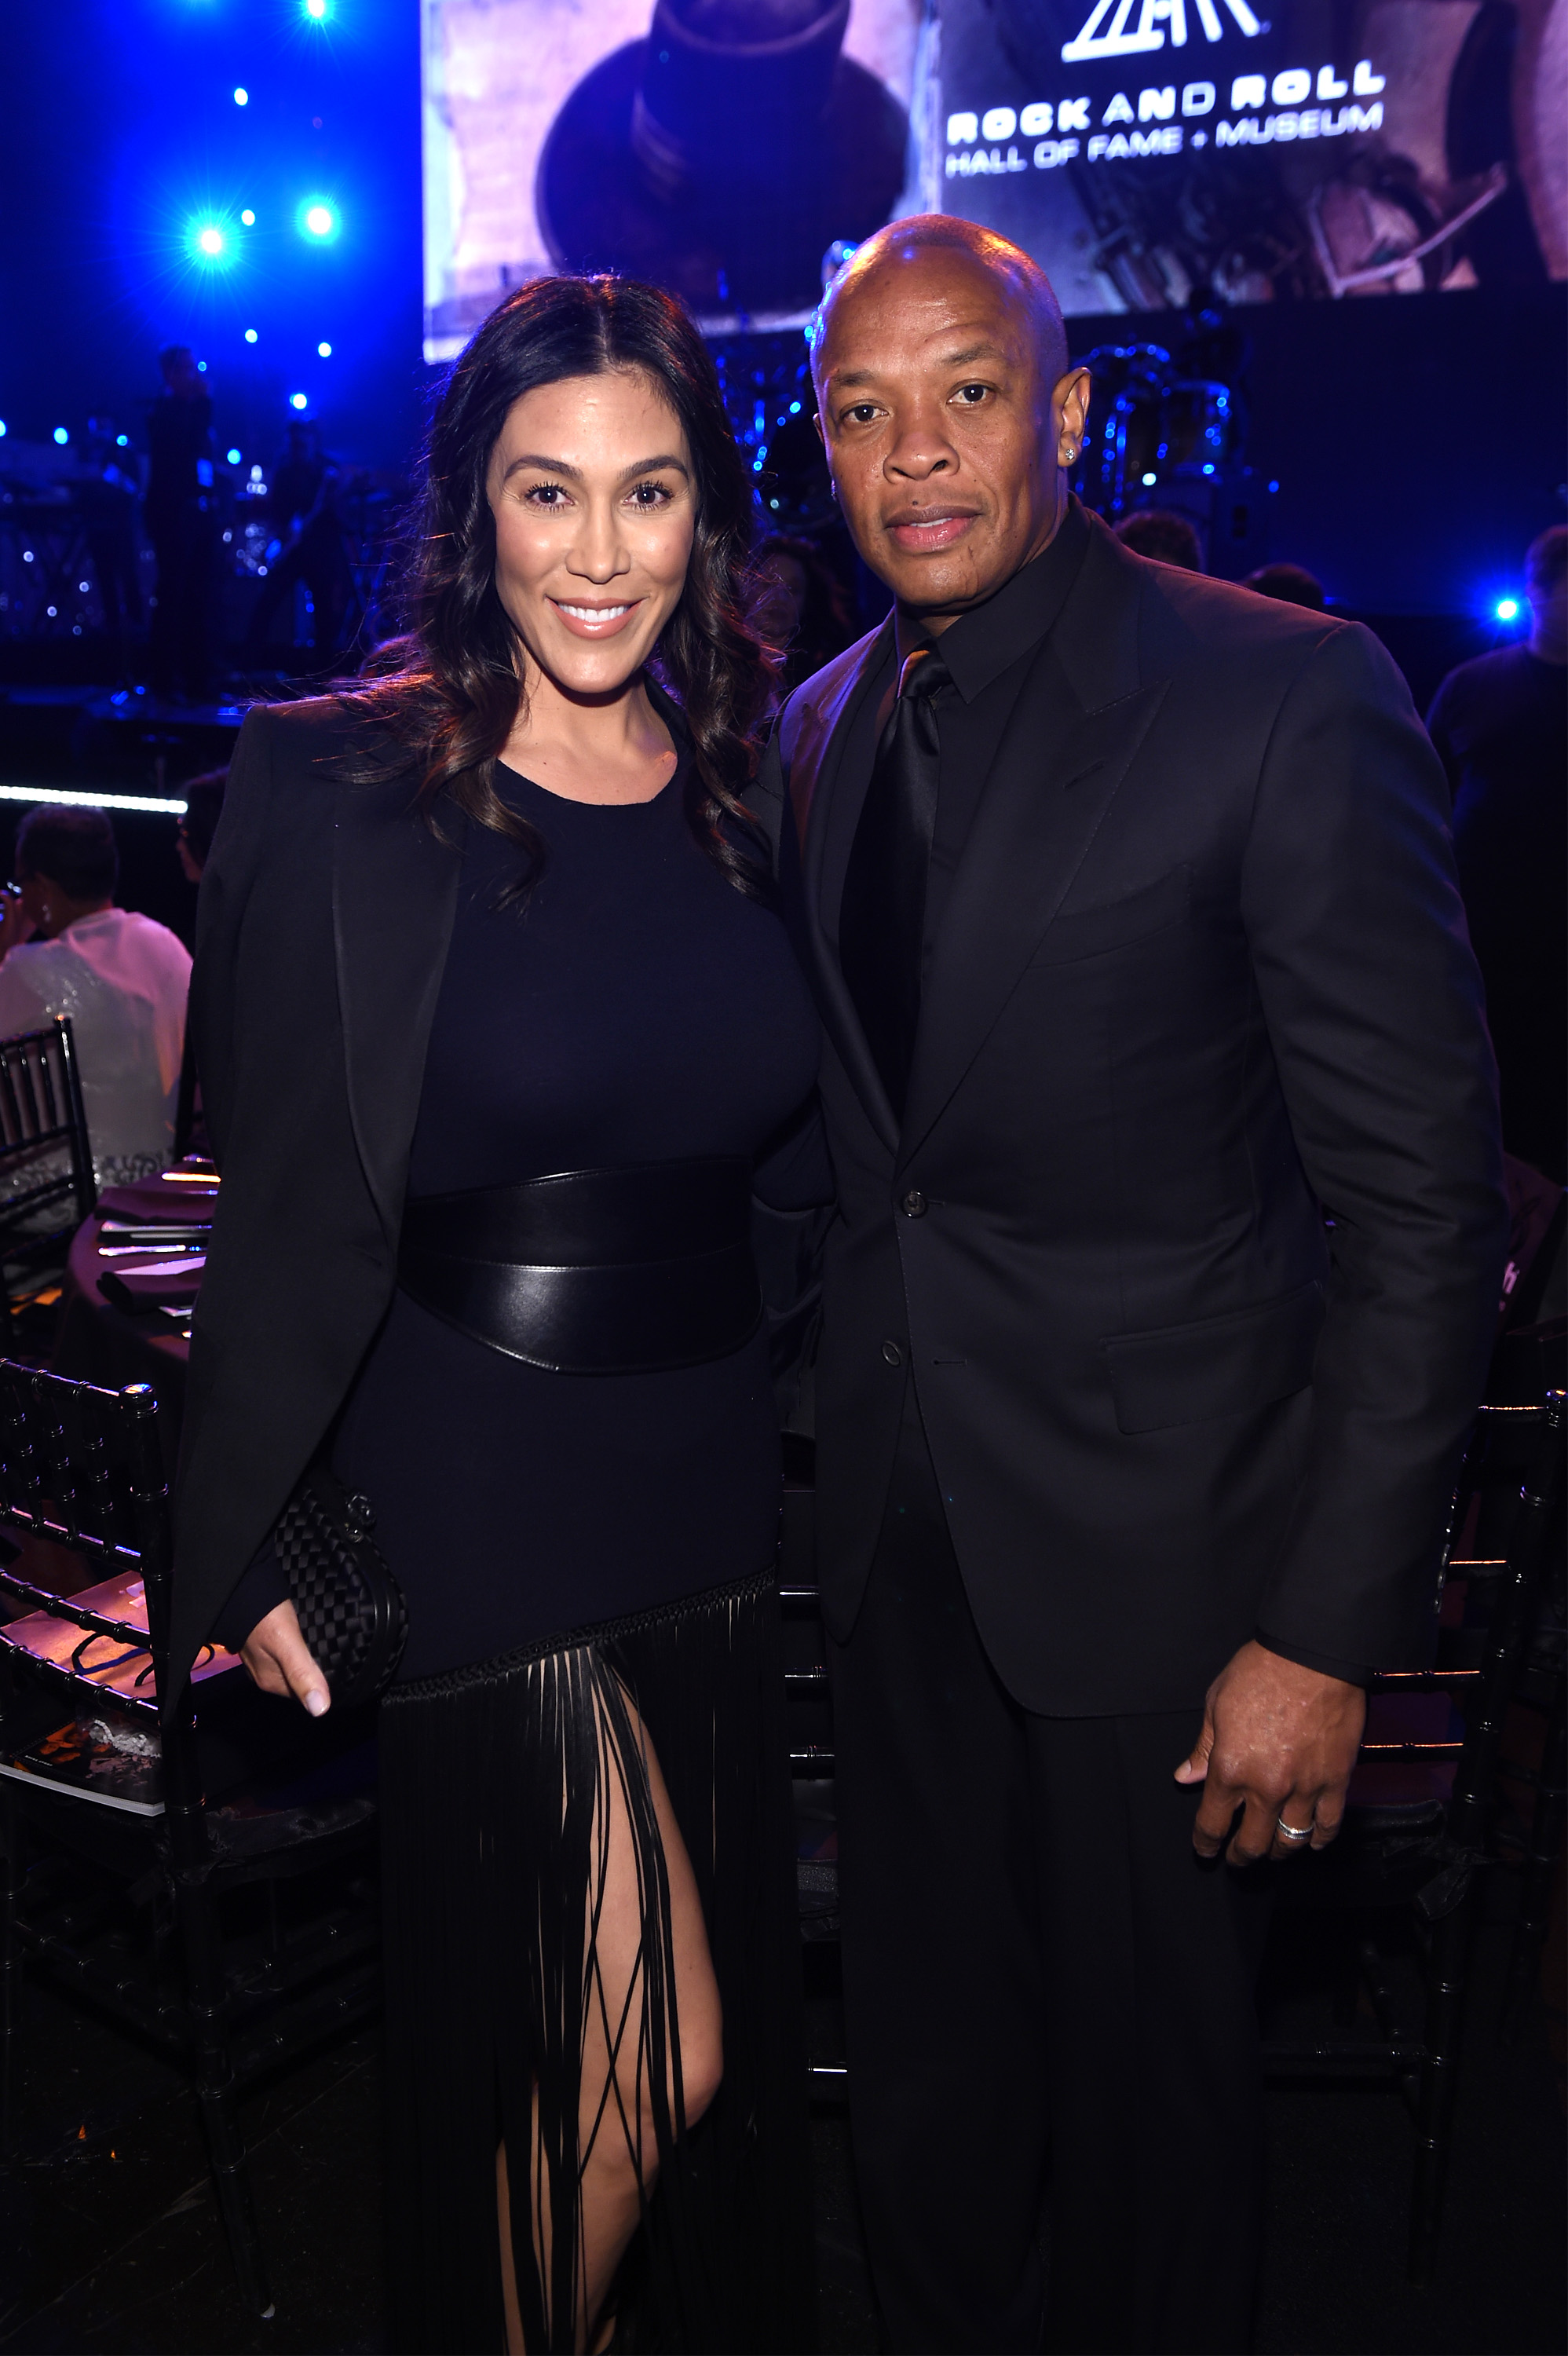 Nicole Threatt and Dr. Dre attend the 31st Annual Rock And Roll Hall Of Fame Induction Ceremony at Barclays Center of Brooklyn on April 8, 2016, in New York City. | Source: Getty Images